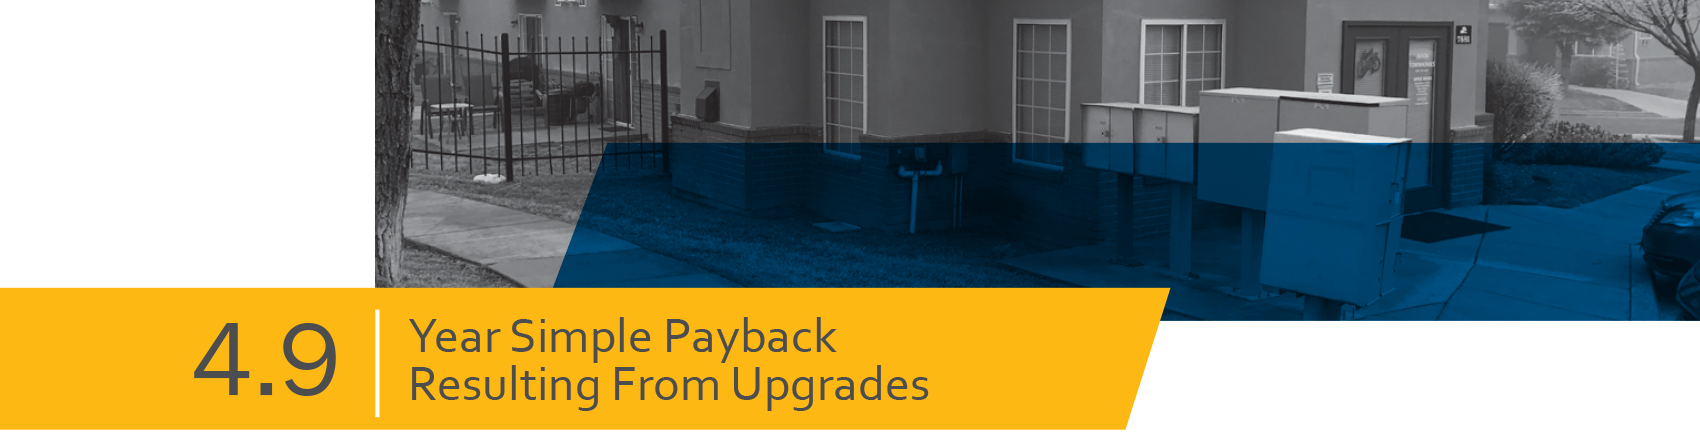 4.9 Year Simple Payback Resulting From Upgrades